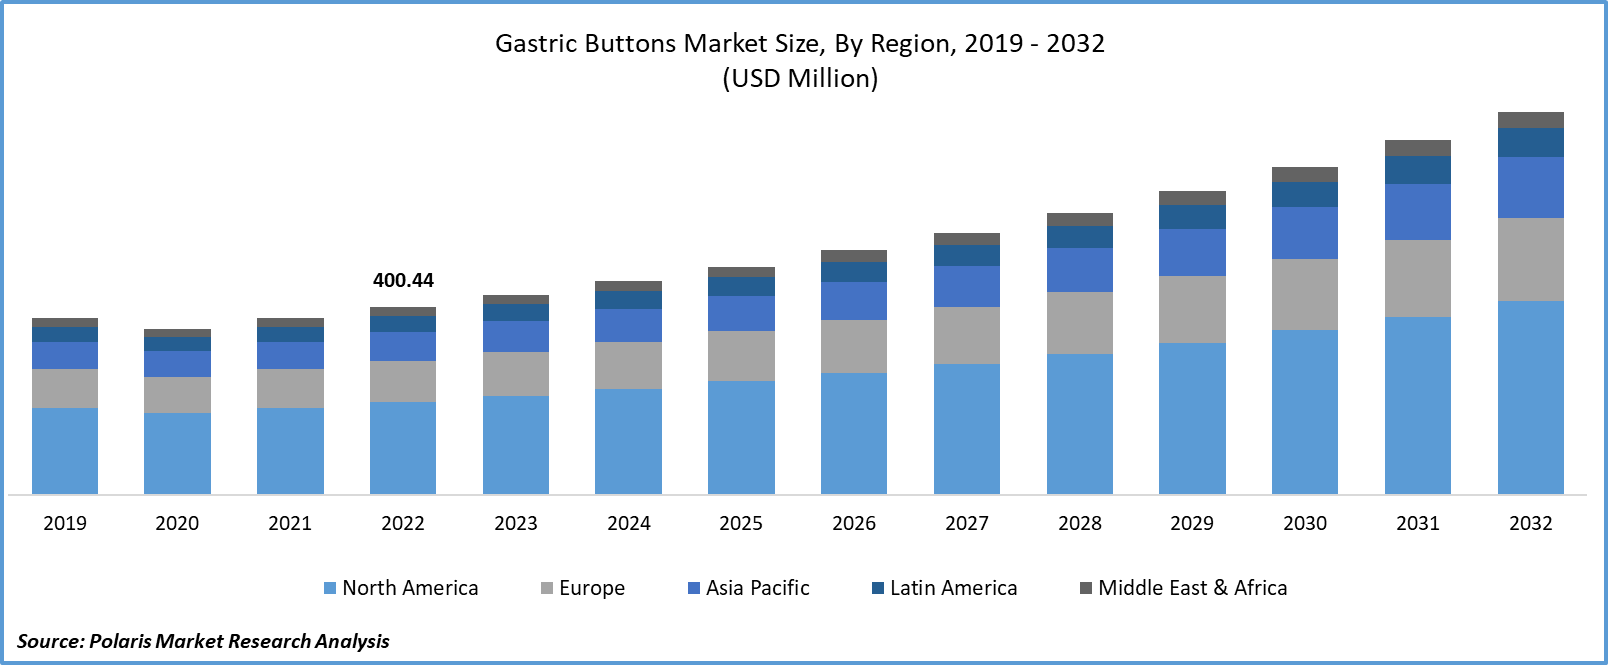 Gastric Buttons Market Size